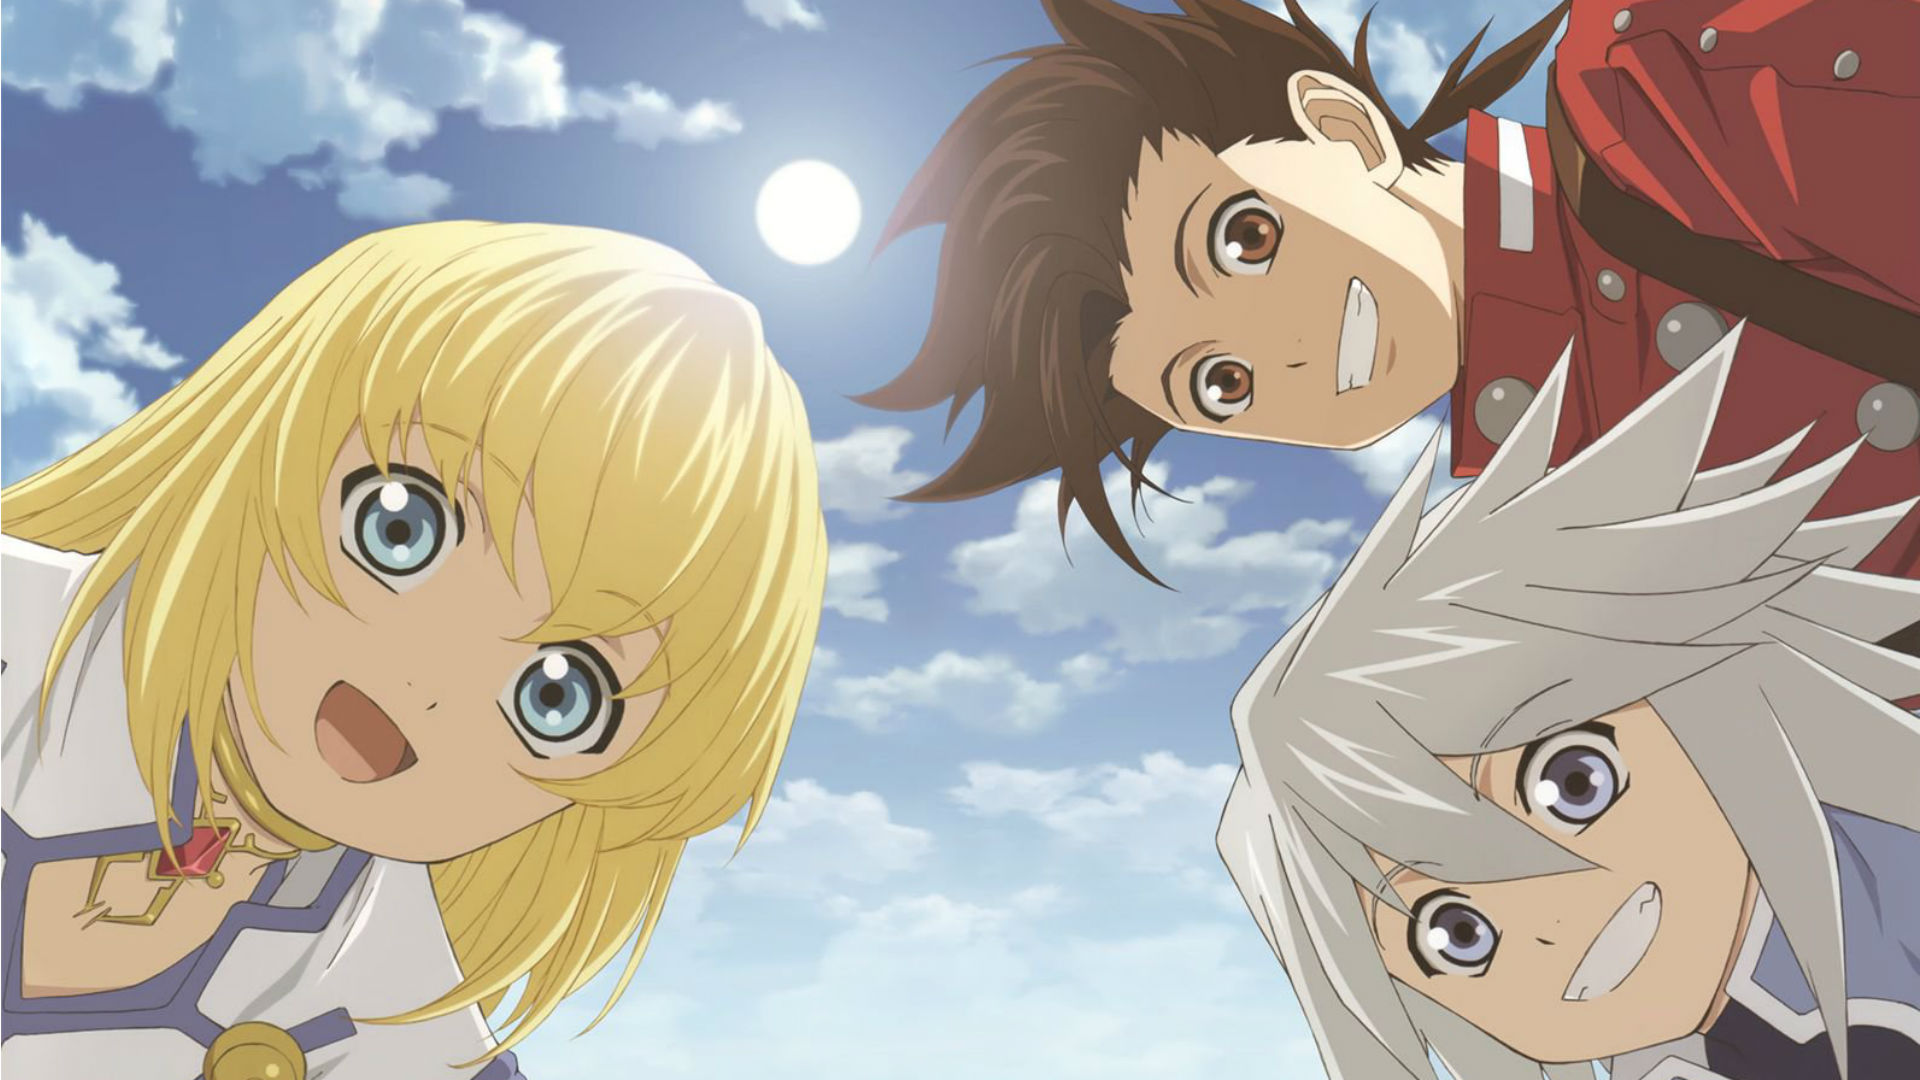 Best anime games: Tales of Symphonia. Image shows three anime people looking down on you and looking happy with clouds behind them.